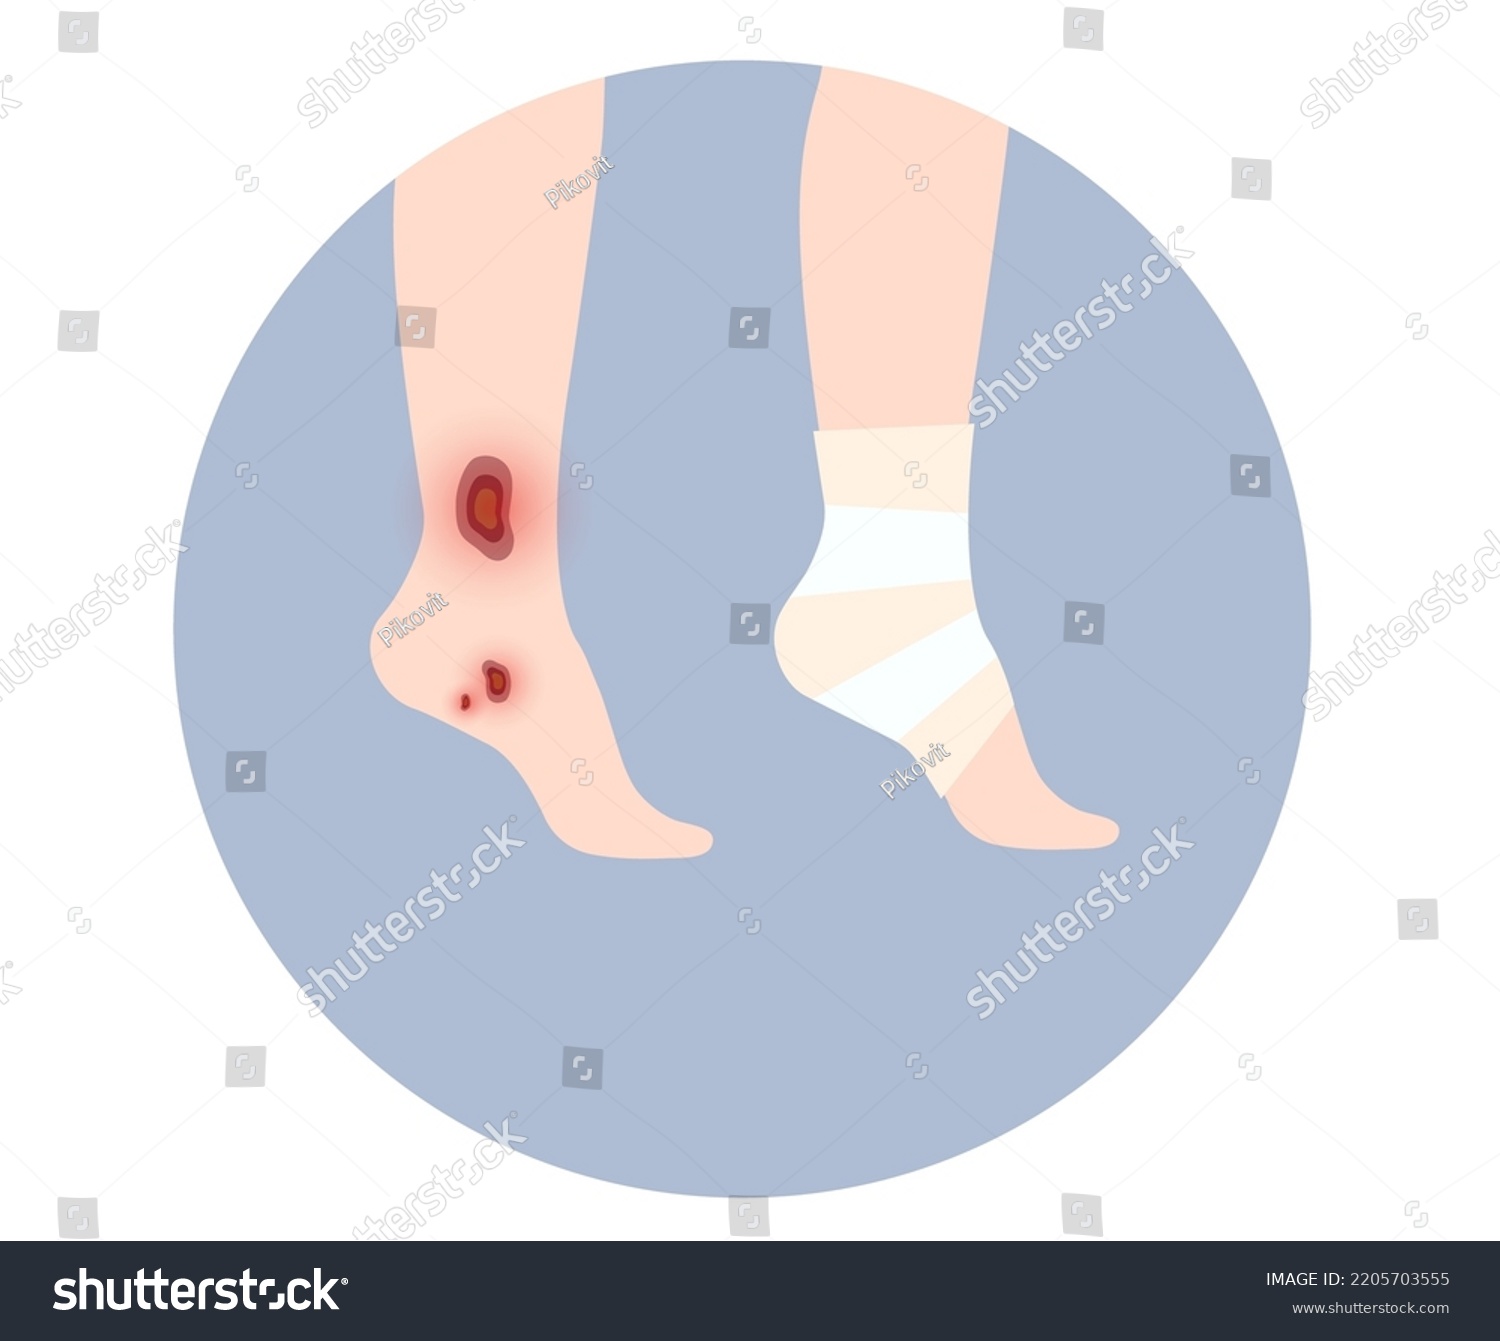 SVG of Sore, cut or ulcer on human leg. Elastic bandage, wrap medical gauze over foot. Healthcare concept. First help with injured ankle in a clinic or hospital. Patient with trauma flat vector illustration svg